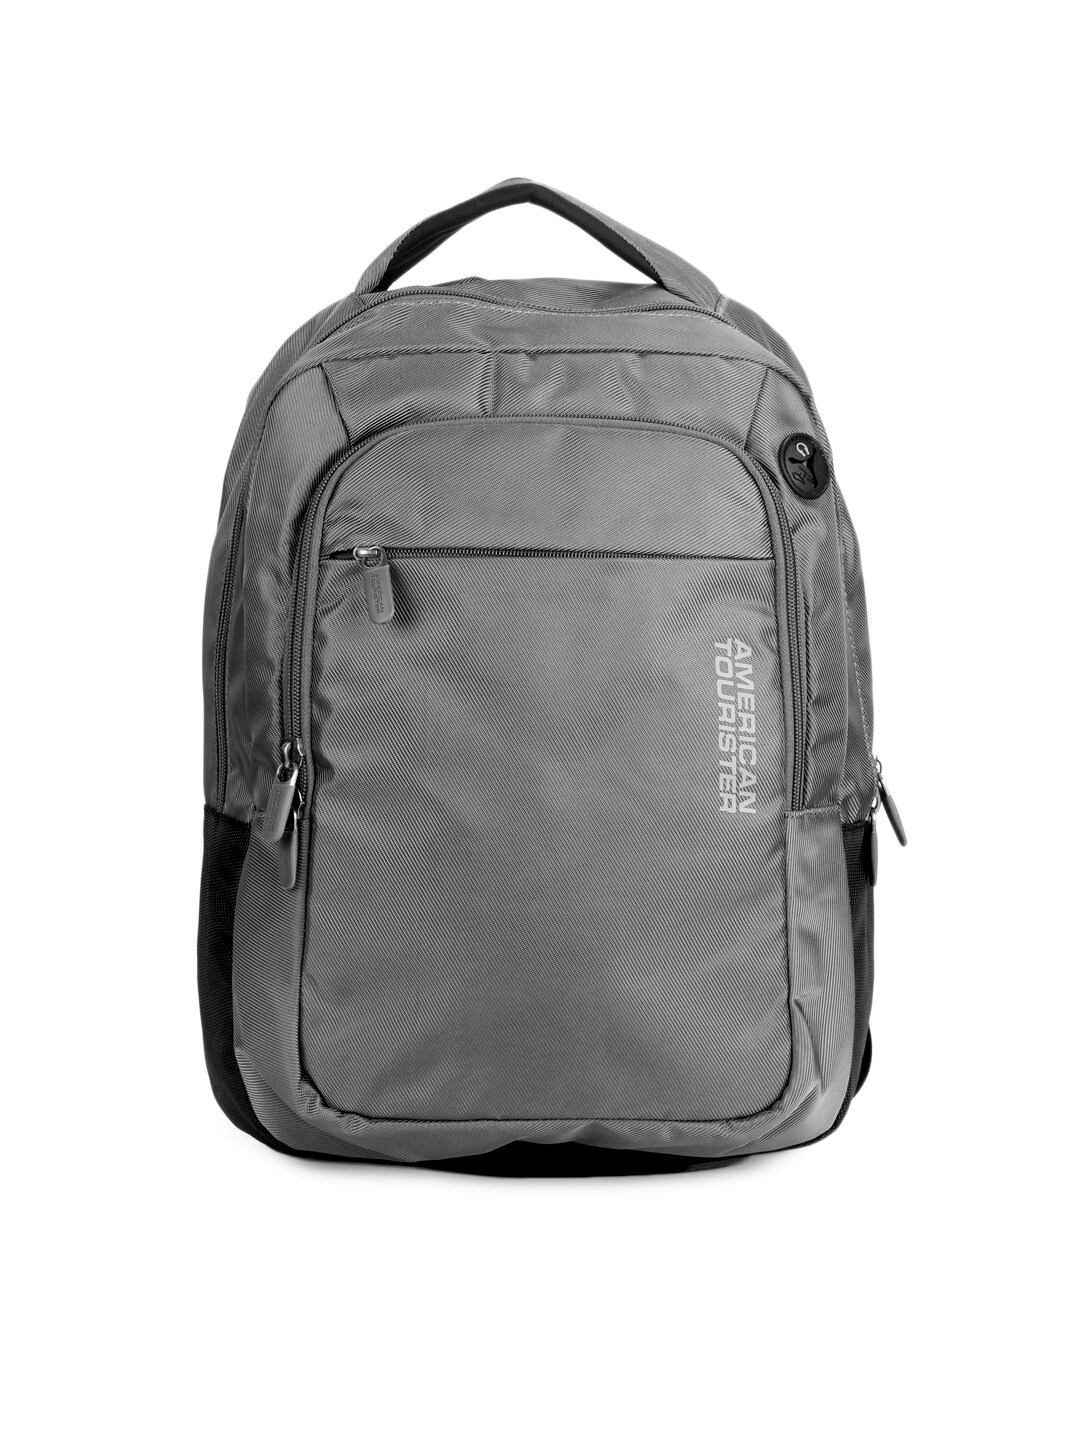 American Tourister Unisex Grey Backpack